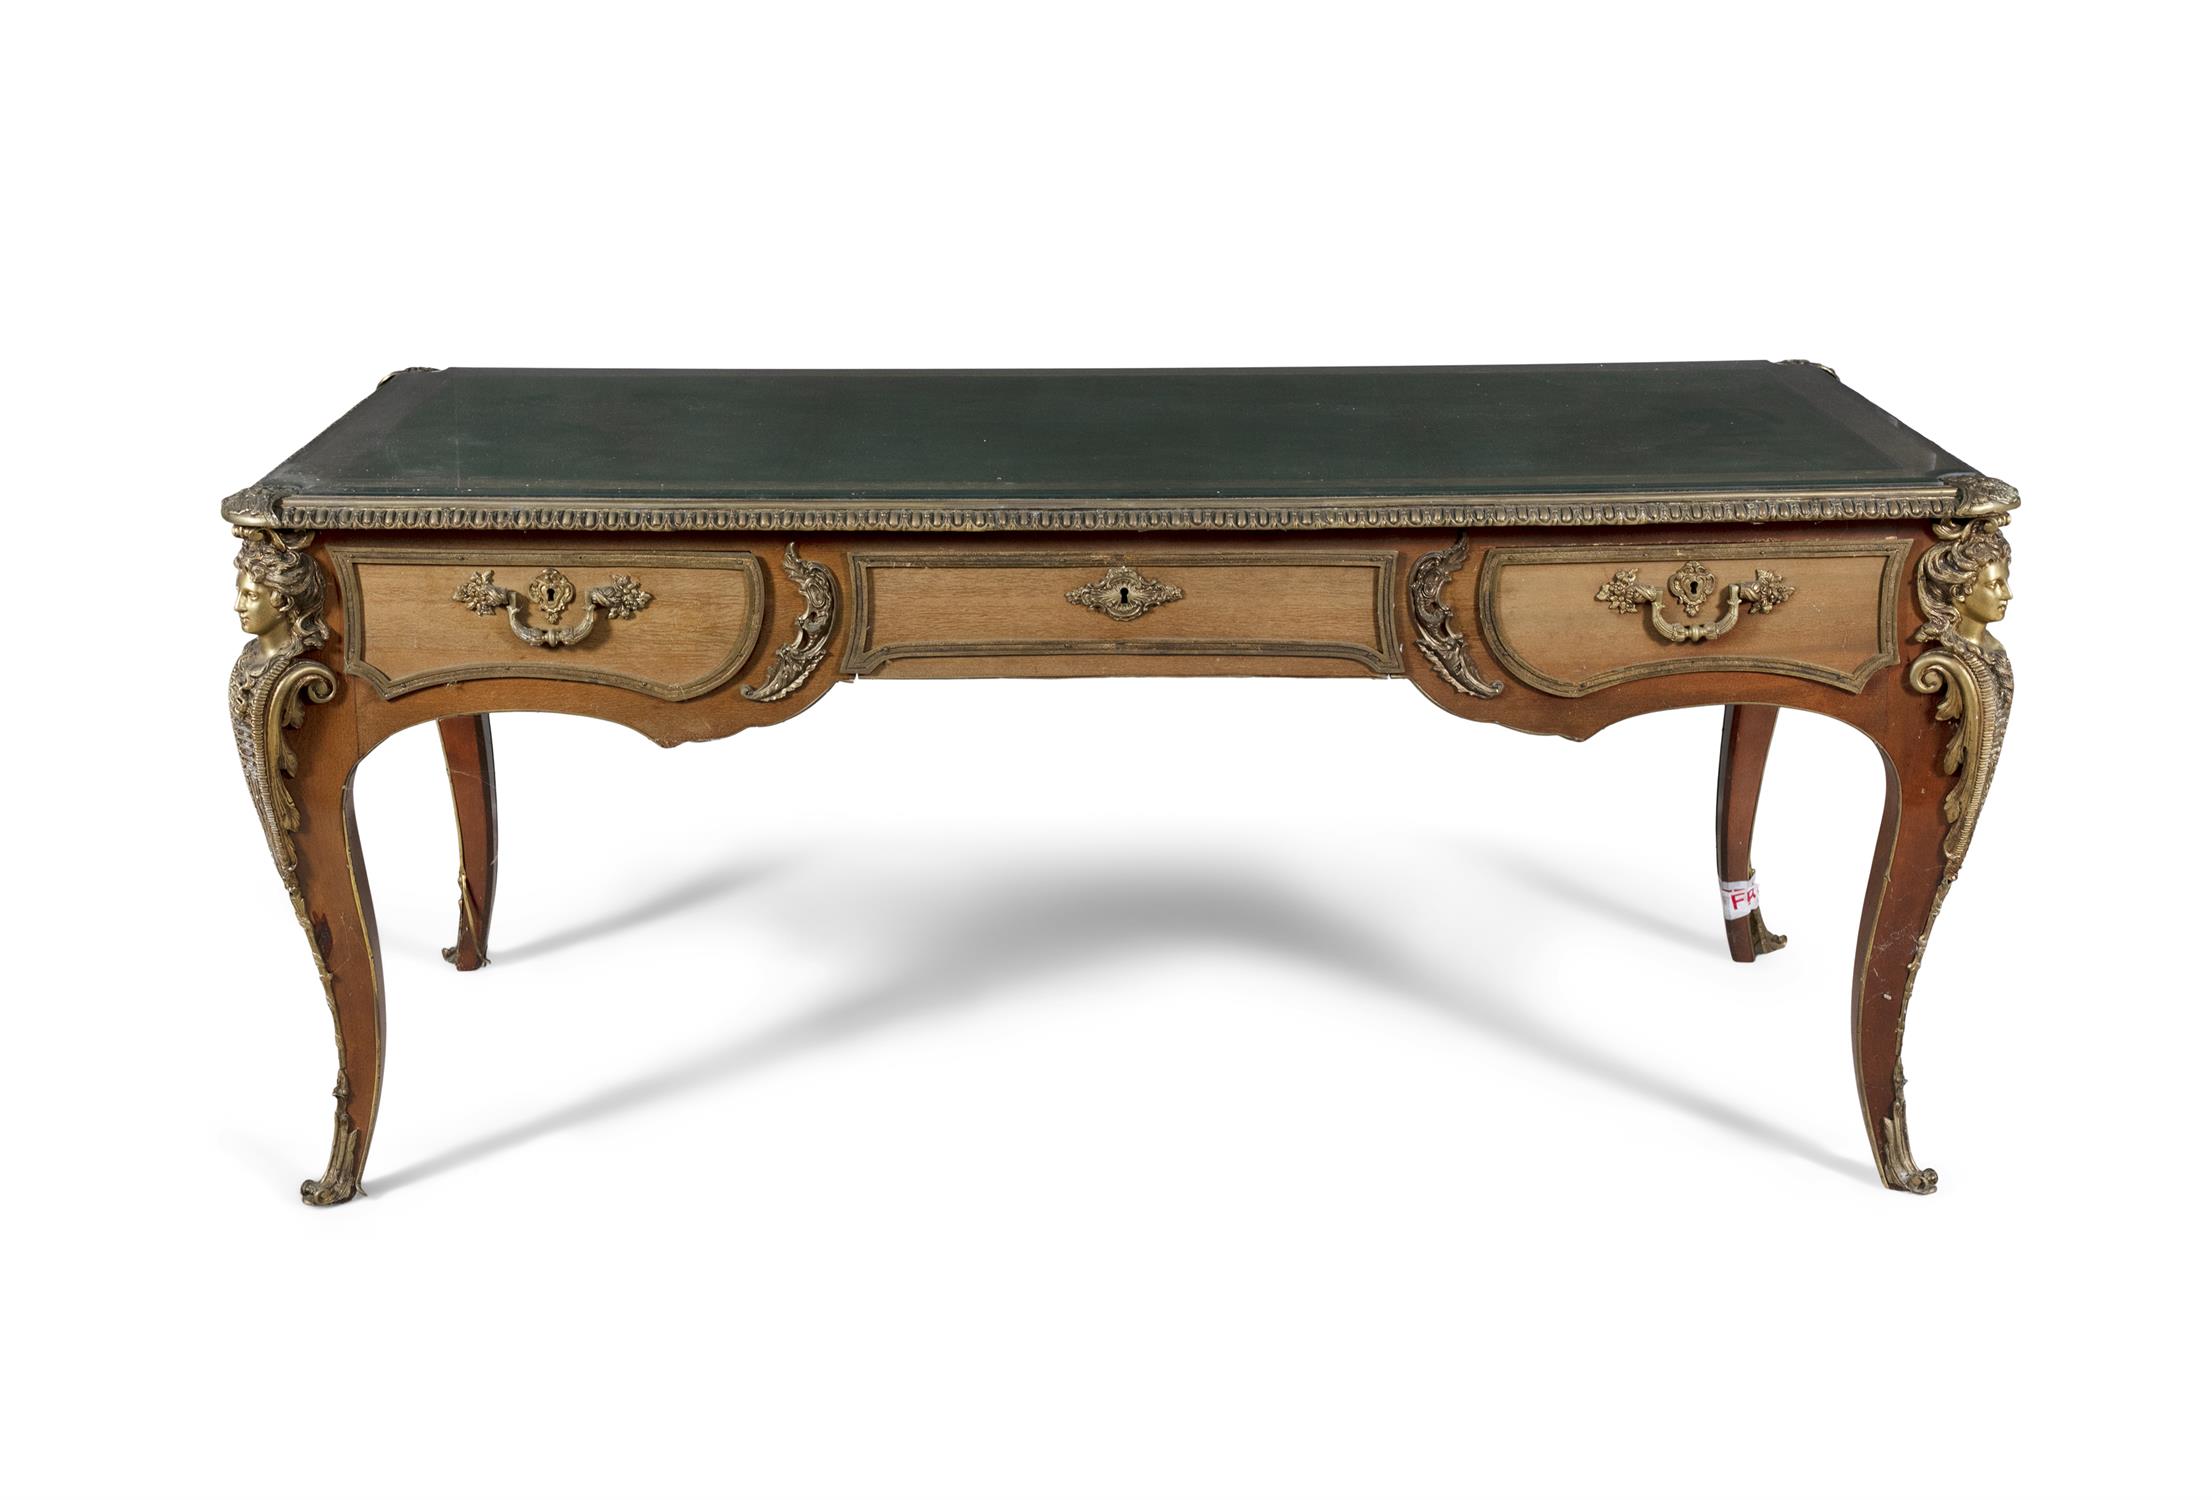 A FRENCH MAHOGANY AND ORMOLU MOUNTED BUREAU PLAT, mid-20th century, the rectangular top with